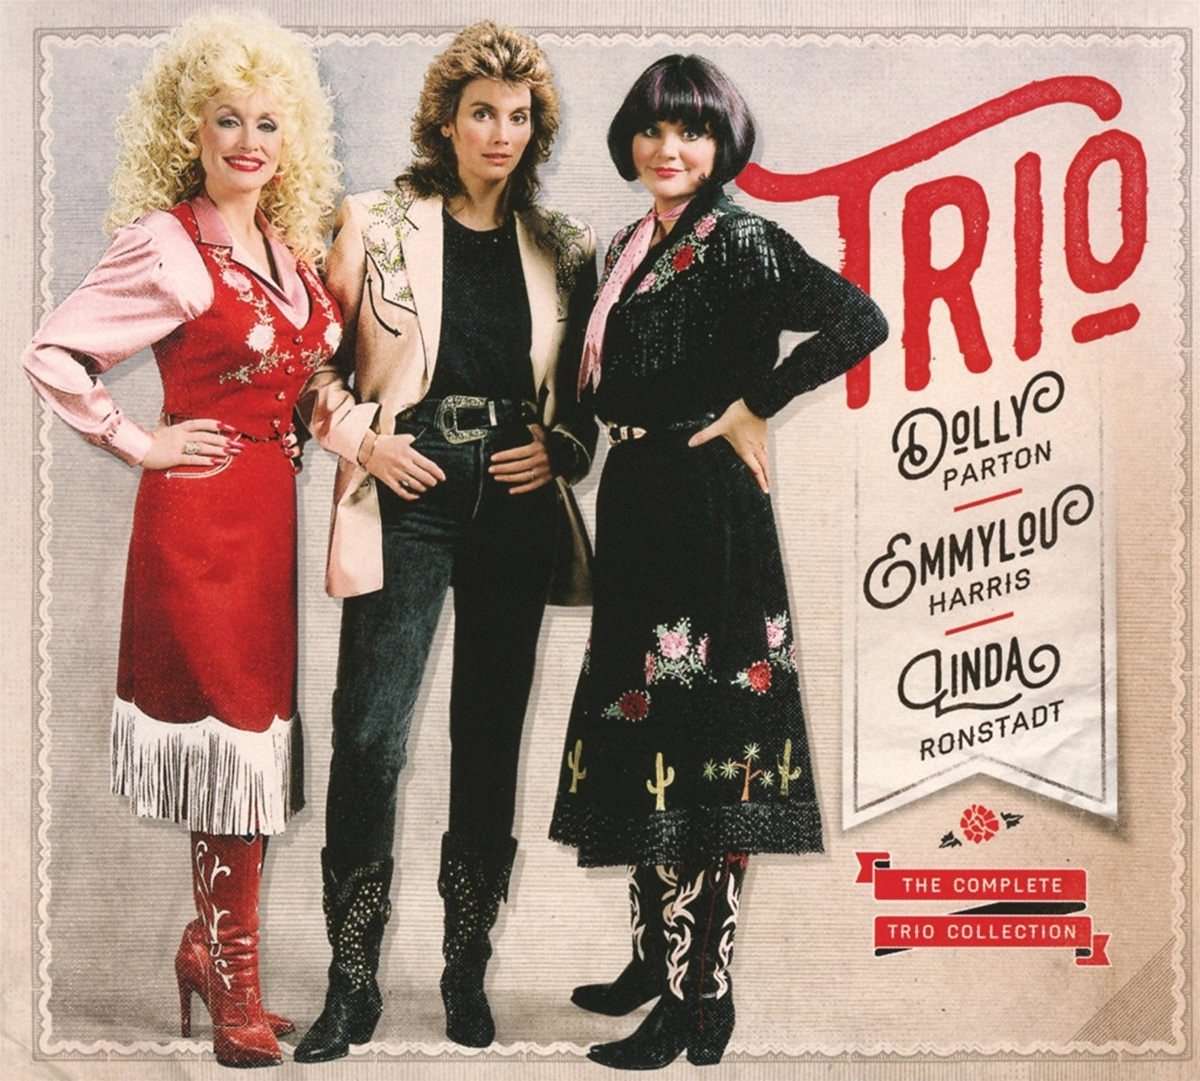 Dolly Parton, Linda Ronstadt, Emmylou Harris - The Complete Trio Collection {Deluxe} (2016) [HDTracks FLAC 24bit/96kHz]